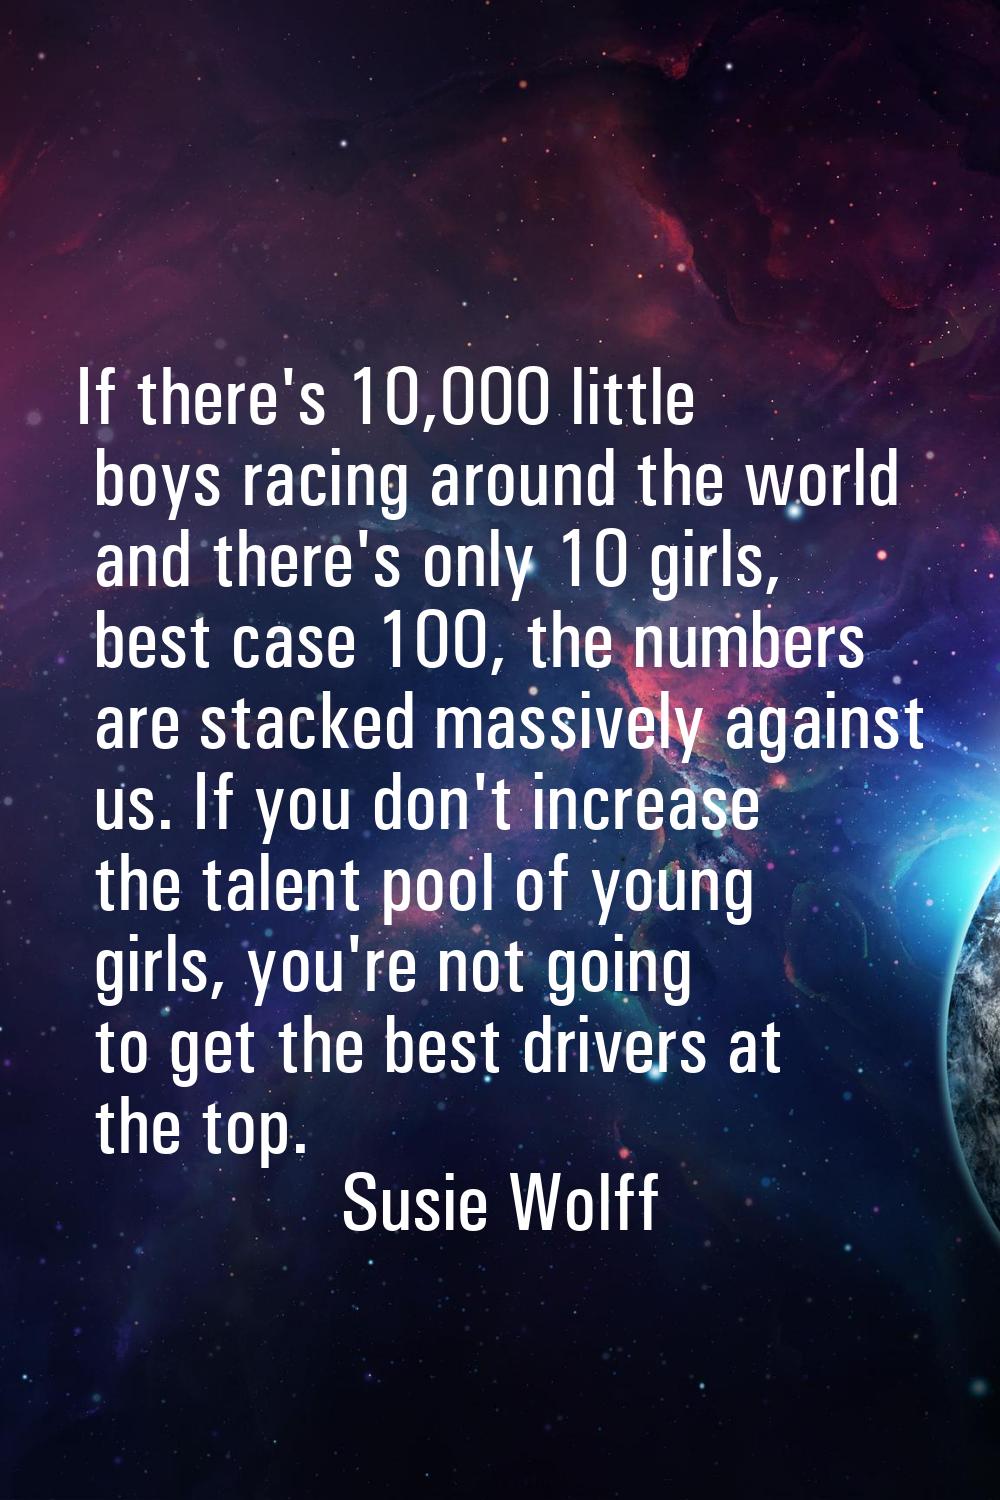 If there's 10,000 little boys racing around the world and there's only 10 girls, best case 100, the